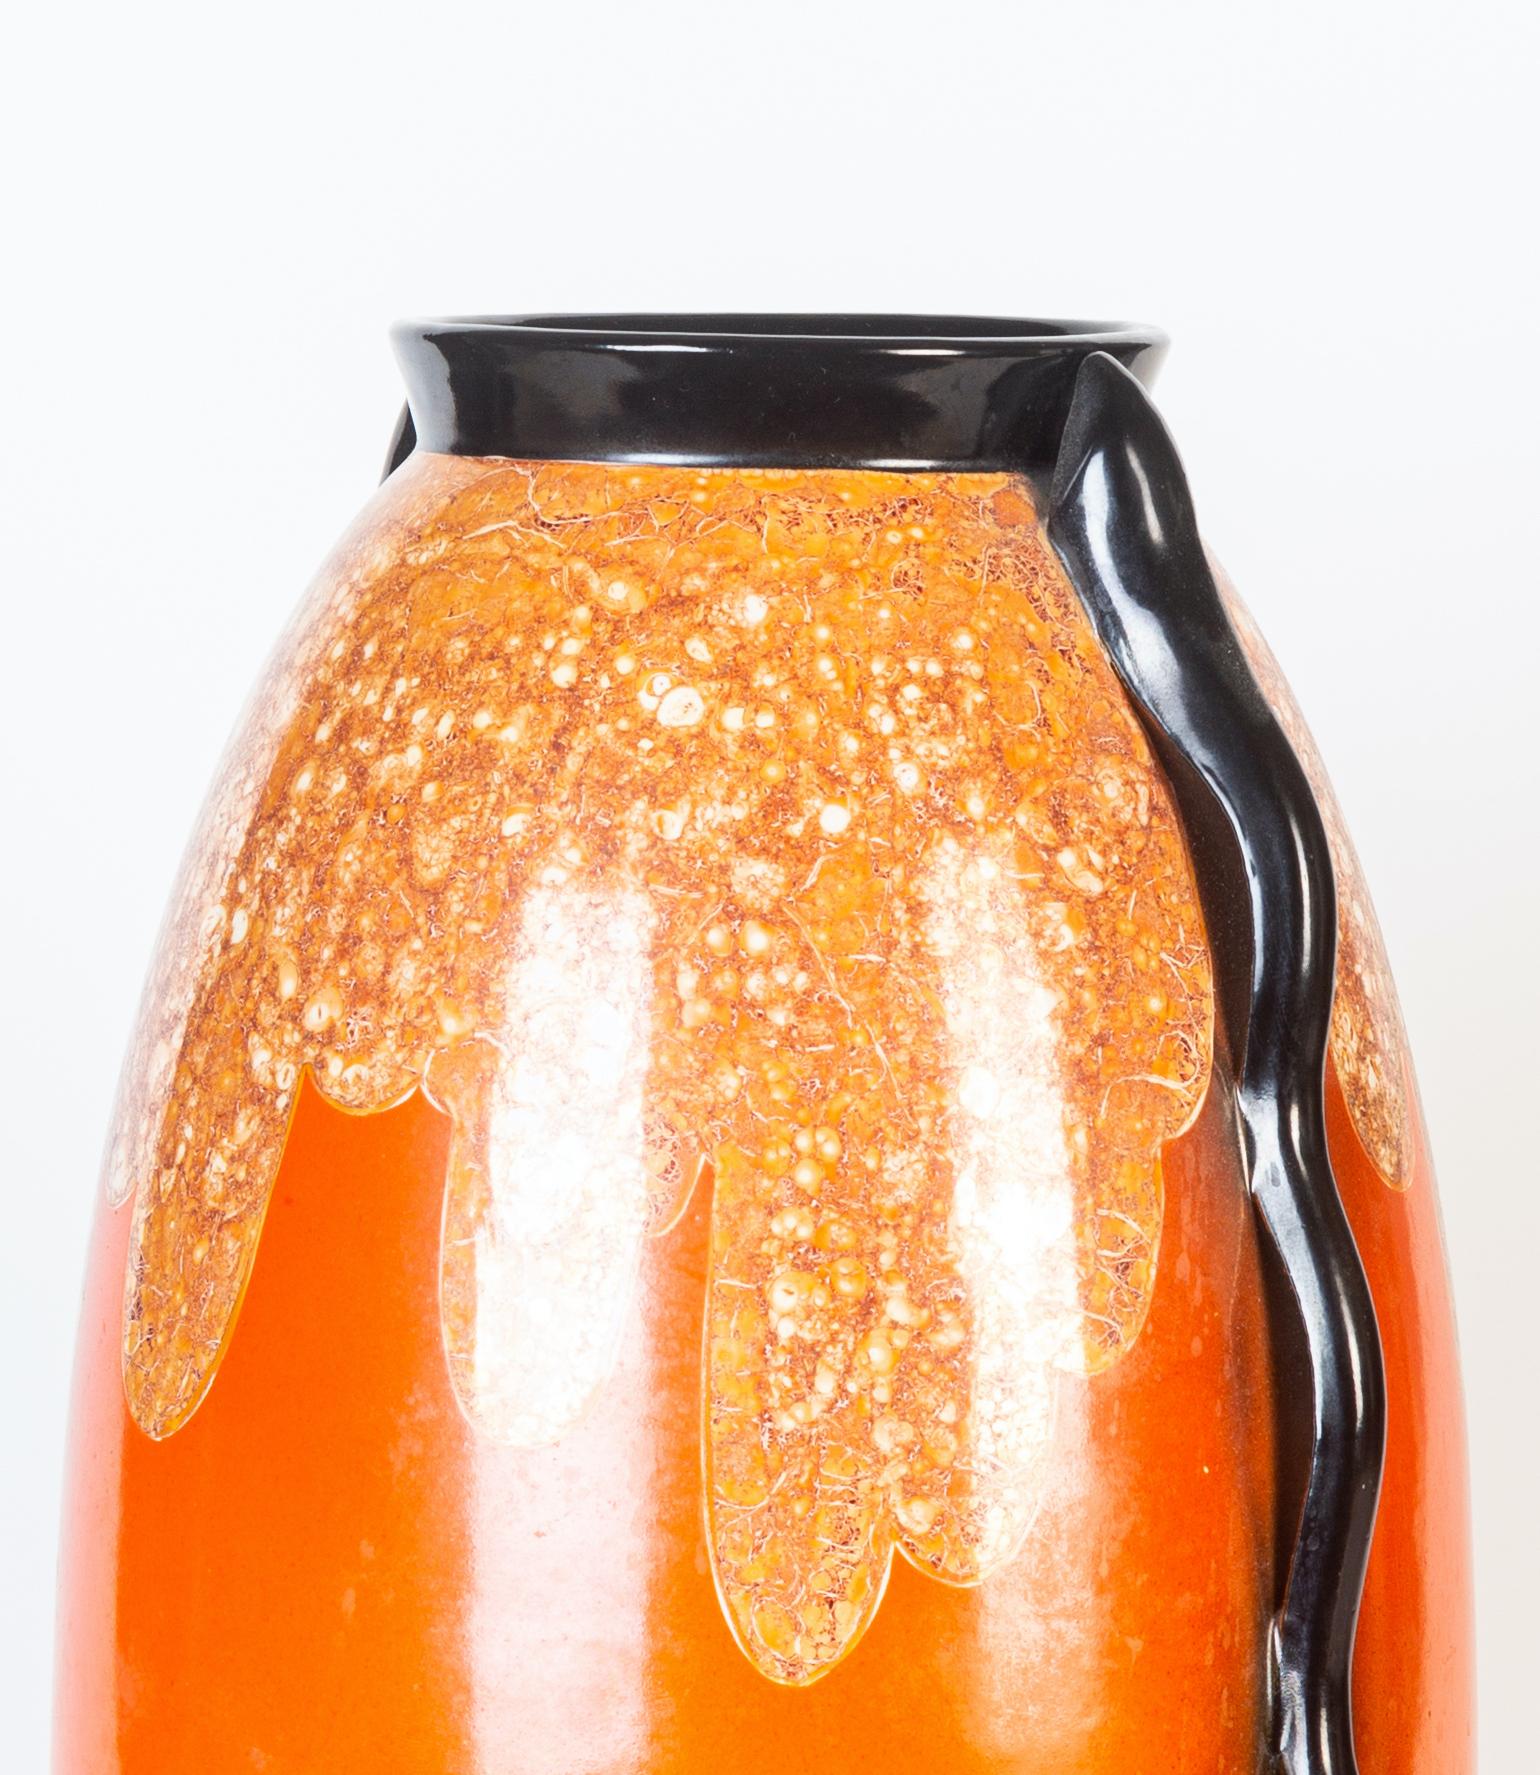 F.A.C.I ceramic vase is a vintage ceramic decorative object, realized during the 1950s. 

A beautiful orange vase with a decoration on the higher part of the body and with black edge and handles.

This vase was realized by 